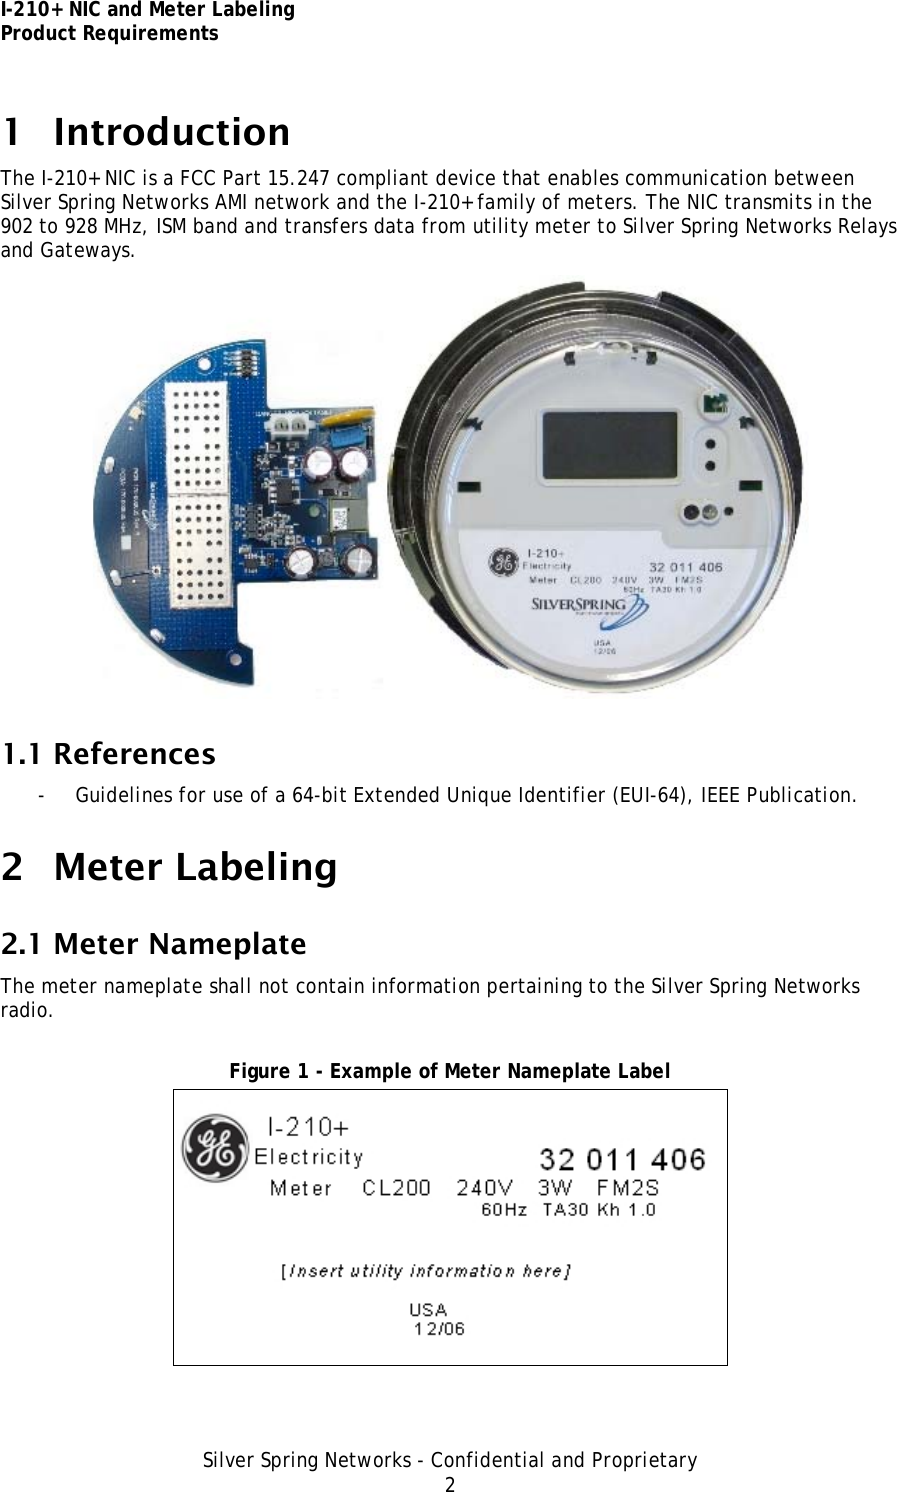 I-210+ NIC and Meter Labeling Product Requirements Silver Spring Networks - Confidential and Proprietary 2 1 Introduction The I-210+ NIC is a FCC Part 15.247 compliant device that enables communication between Silver Spring Networks AMI network and the I-210+ family of meters. The NIC transmits in the 902 to 928 MHz, ISM band and transfers data from utility meter to Silver Spring Networks Relays and Gateways.  1.1 References - Guidelines for use of a 64-bit Extended Unique Identifier (EUI-64), IEEE Publication. 2 Meter Labeling 2.1 Meter Nameplate The meter nameplate shall not contain information pertaining to the Silver Spring Networks radio.  Figure 1 - Example of Meter Nameplate Label  